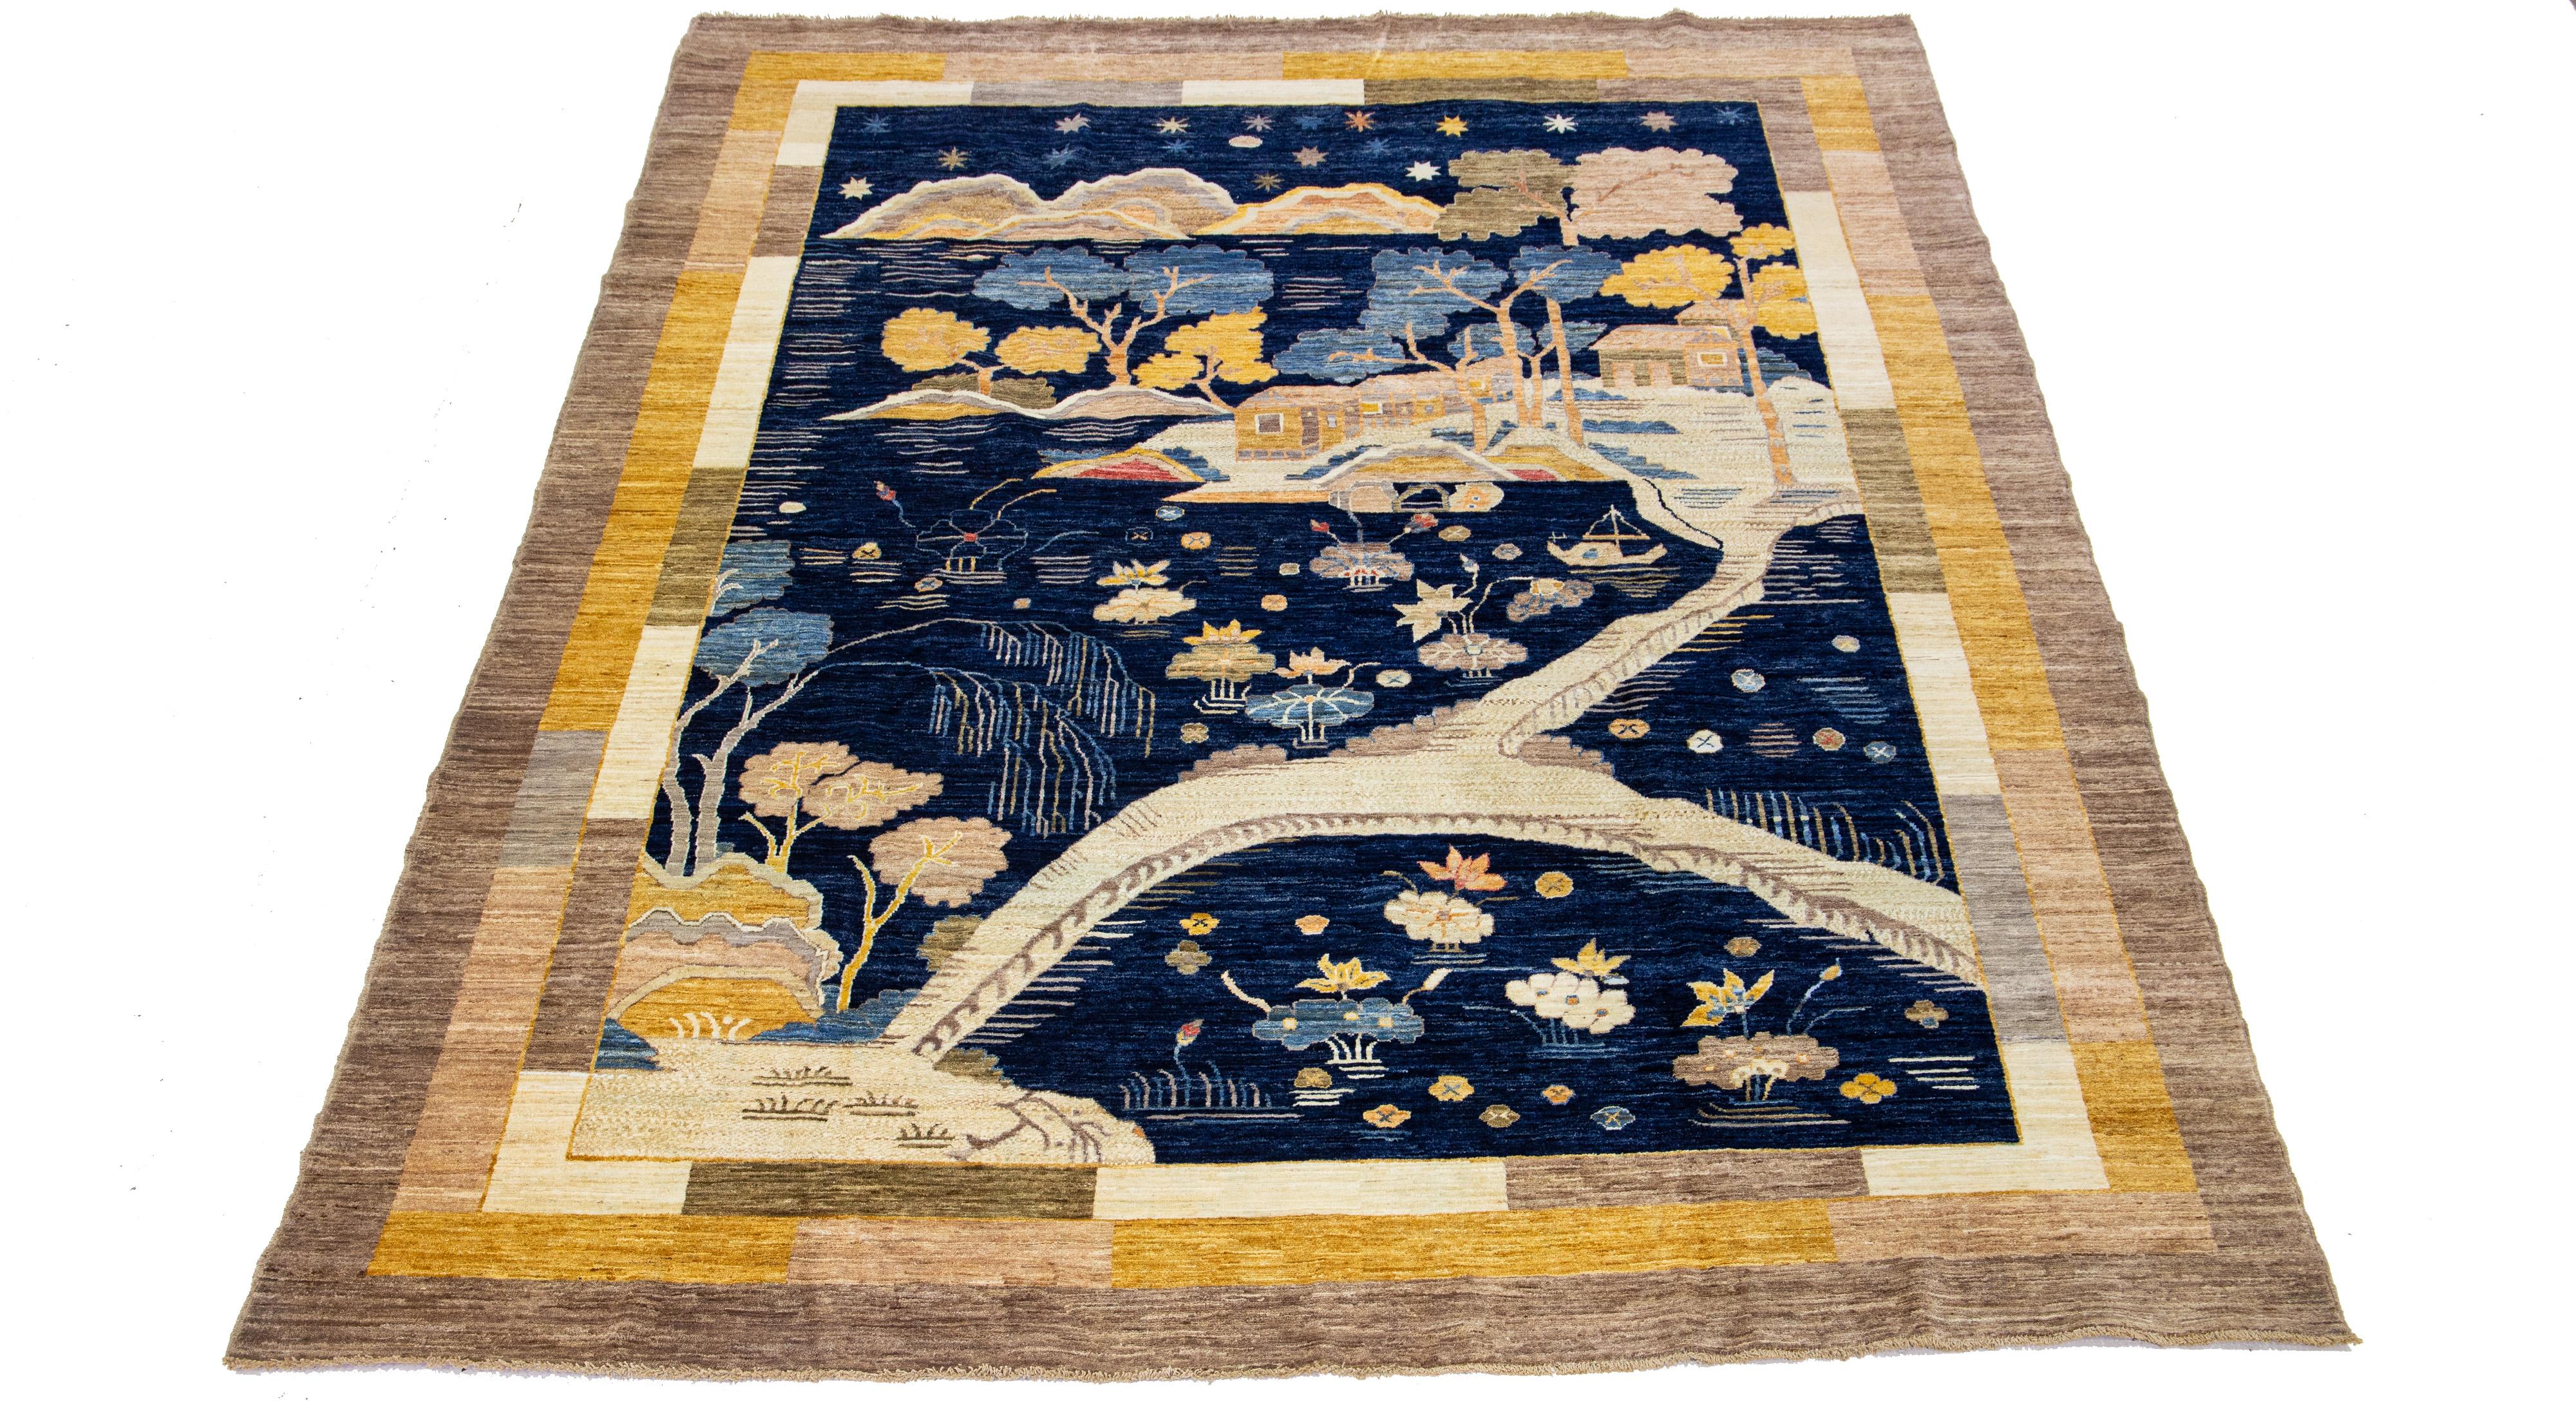 This hand-knotted wool rug showcases an exquisite Modern Art Deco design with a rich navy blue field accentuated by a broad goldenrod and brown frame. The intricate Chinese-style elements are beautifully depicted throughout the rug, embellished with